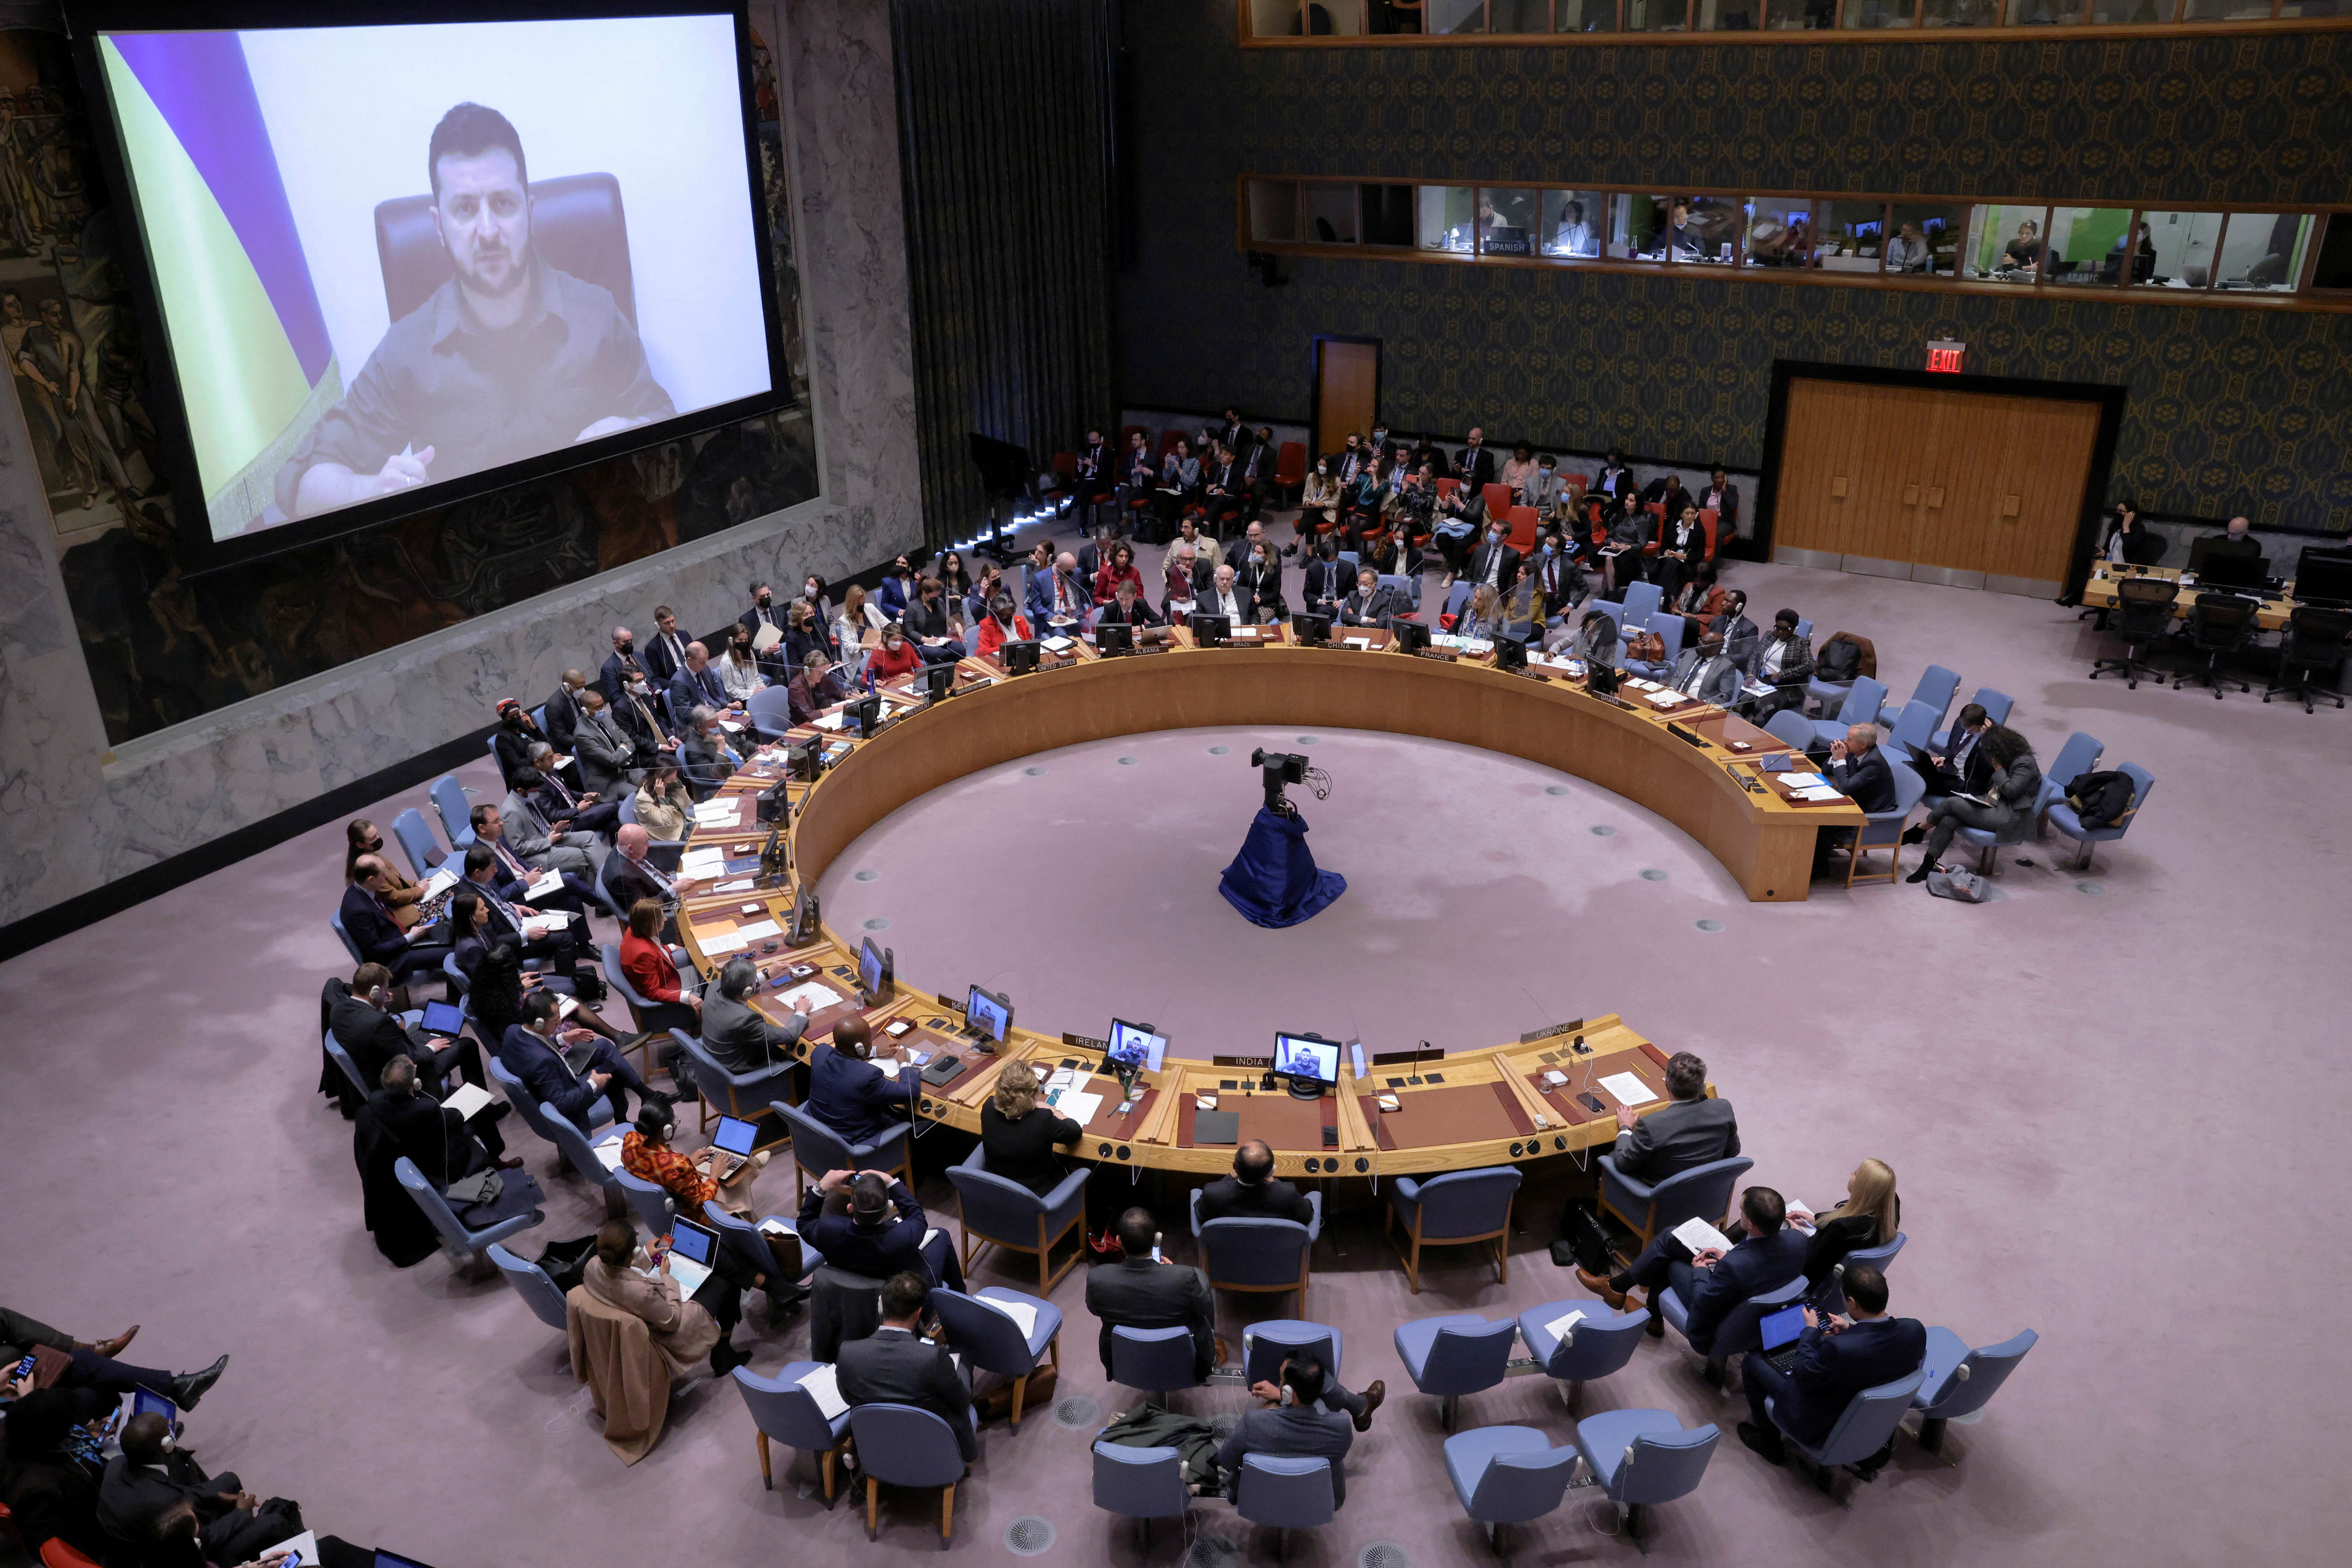 Ukrainian President Volodymyr Zelensky appears on a screen as he addresses the United Nations Security Council via video link during a meeting at the United Nations Headquarters in Manhattan, New York City, on April 5.